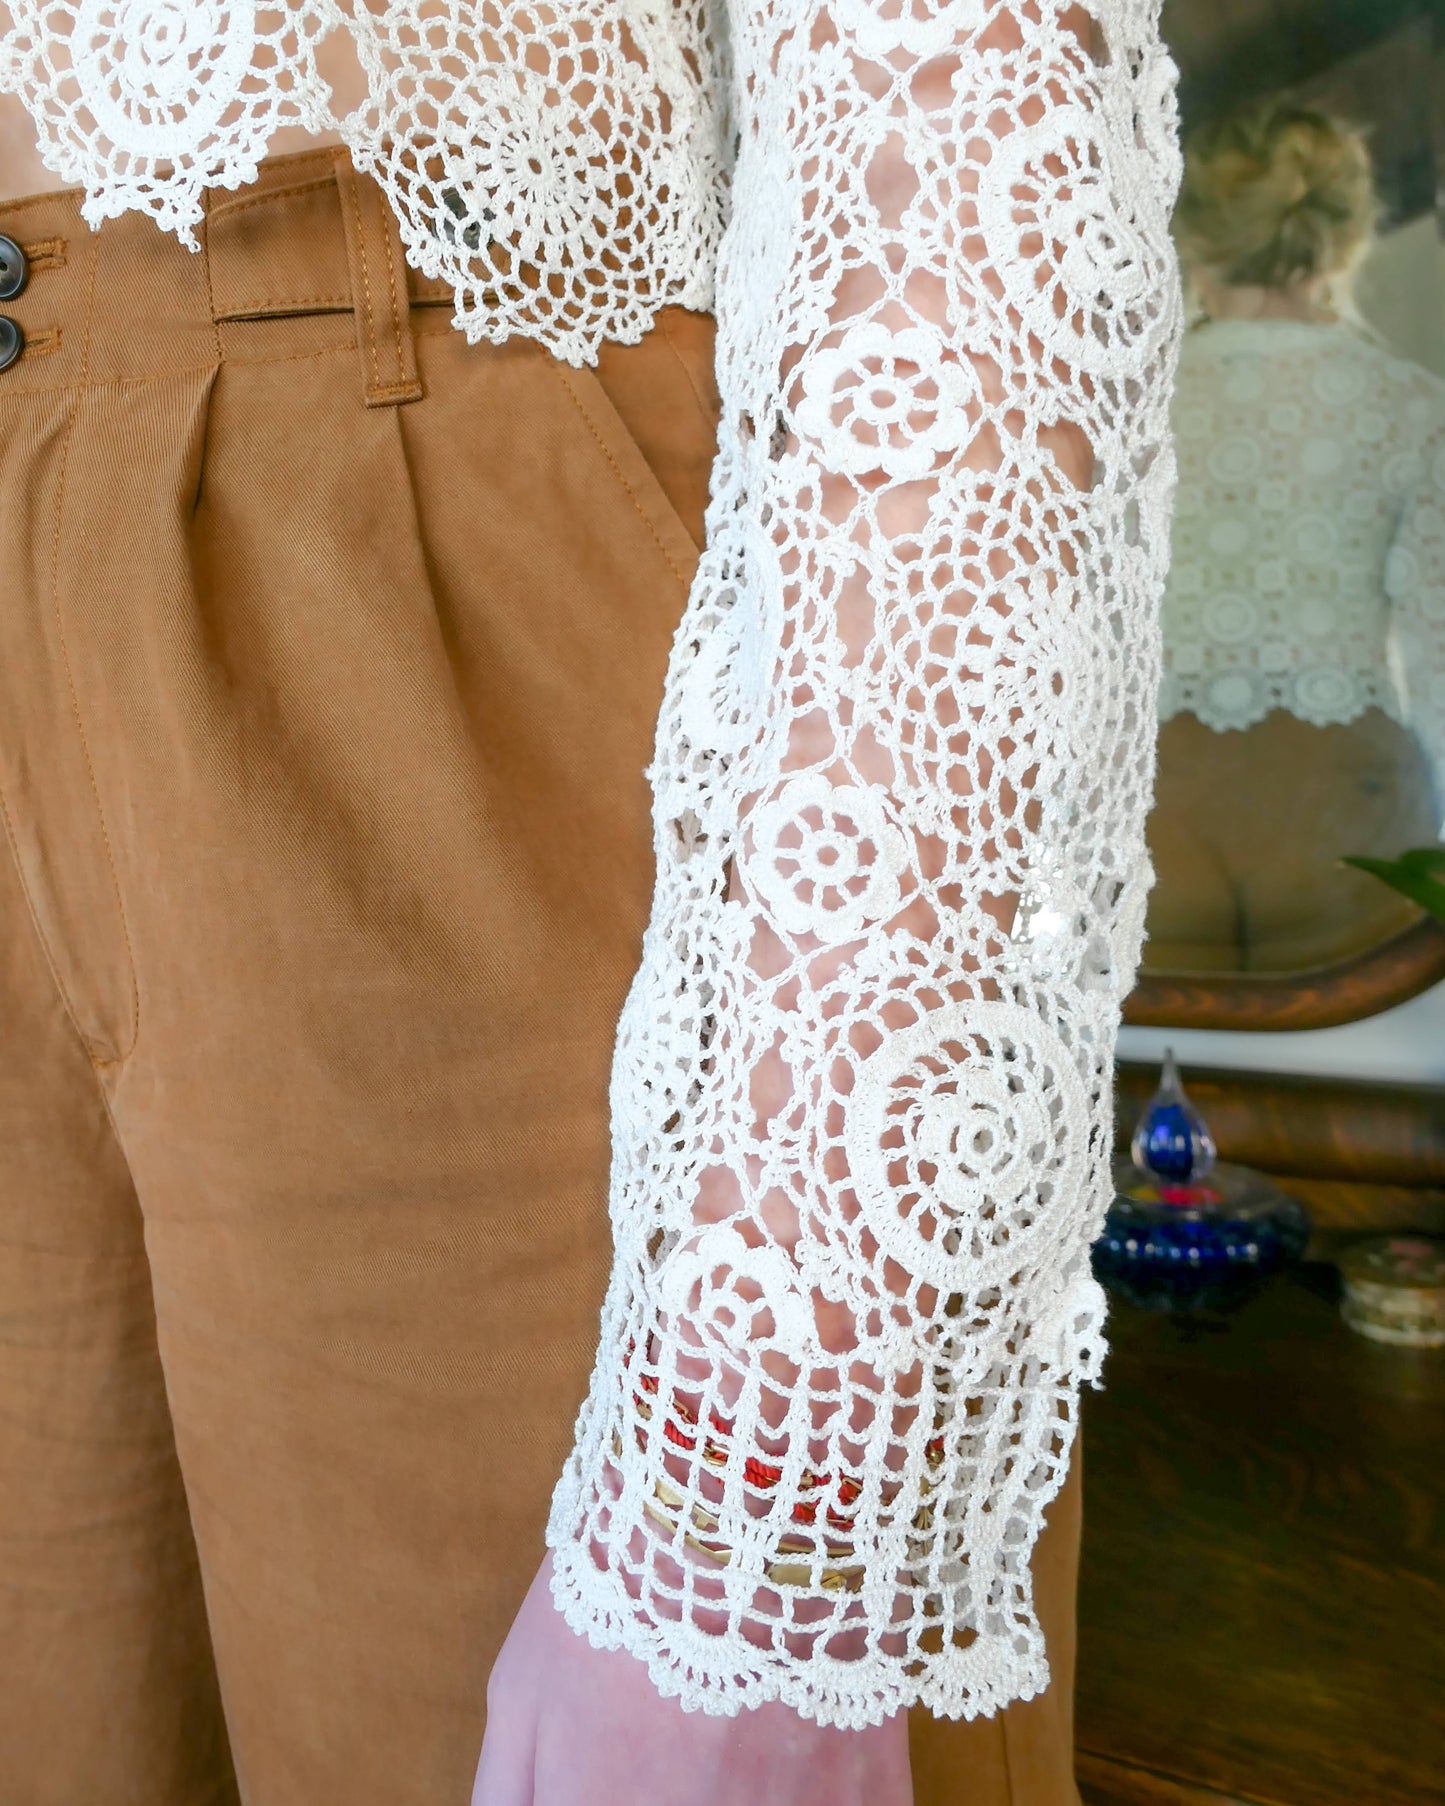 Closeup of the sleeve. Hand crocheted Lim's cardigan.  A versatile and boho chic hand crocheted cropped cardigan sweater in Ivory with a unique, repeating kaleidoscope-like floral pattern throughout. Dress it down with a pair of jeans and sandals, or dress it up with neutral colored wide leg pants, heels, and a pair of vintage dangly earrings.  Size: Fits Small to Medium